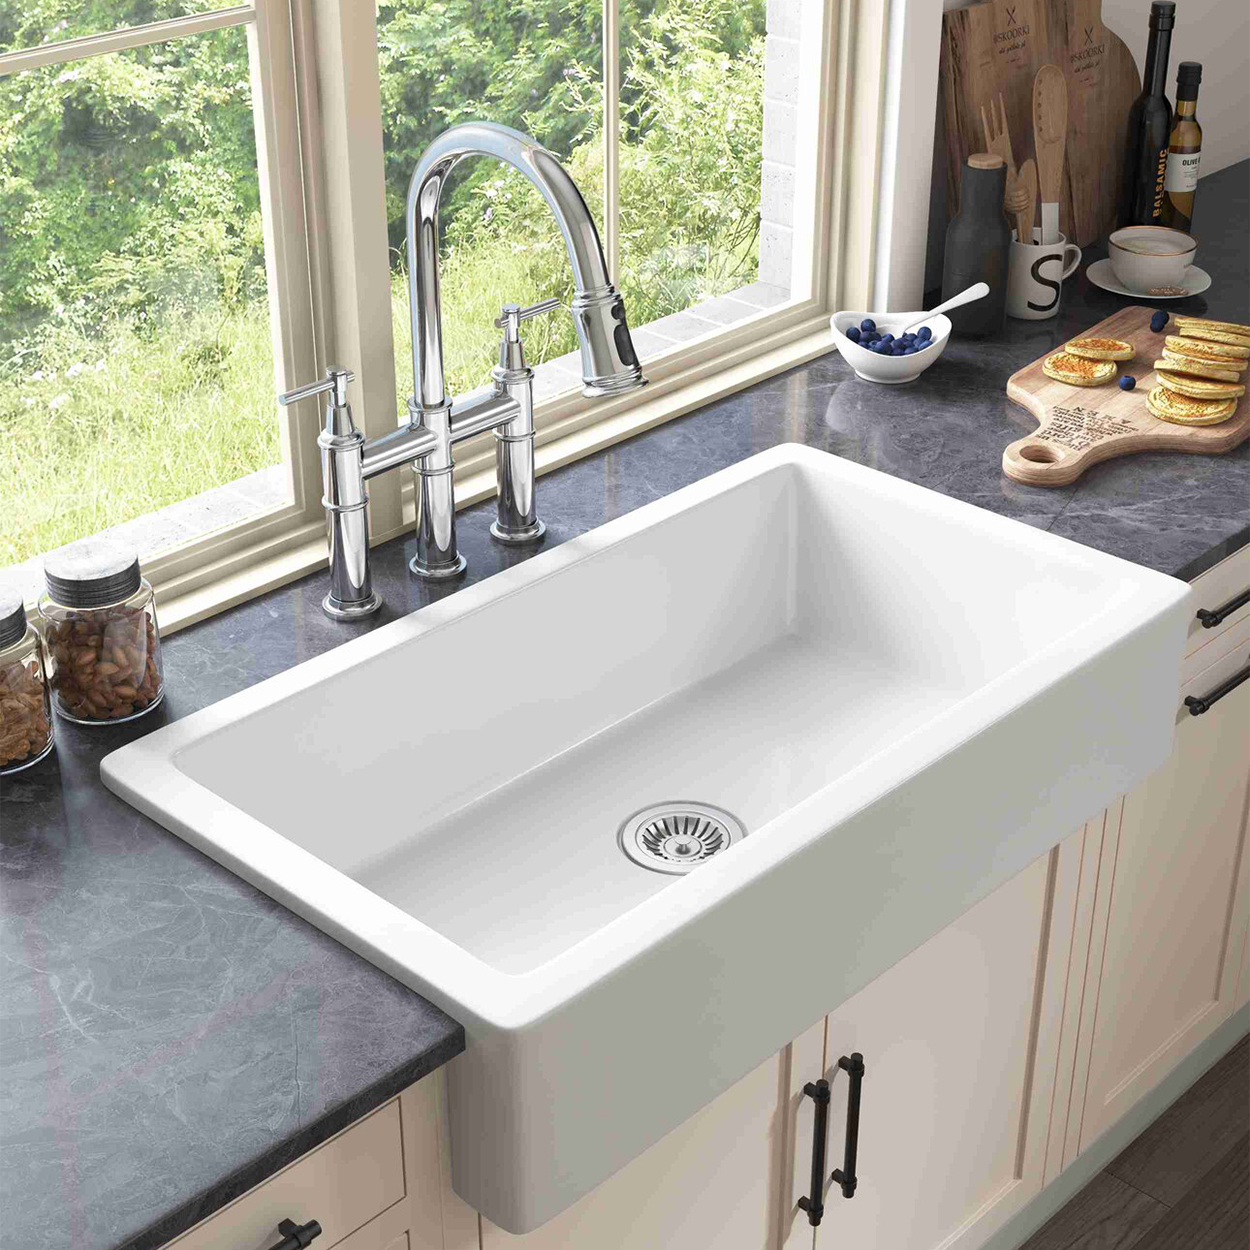 8 Inch kitchen Excellent Solid Easy Install Bridge Faucet